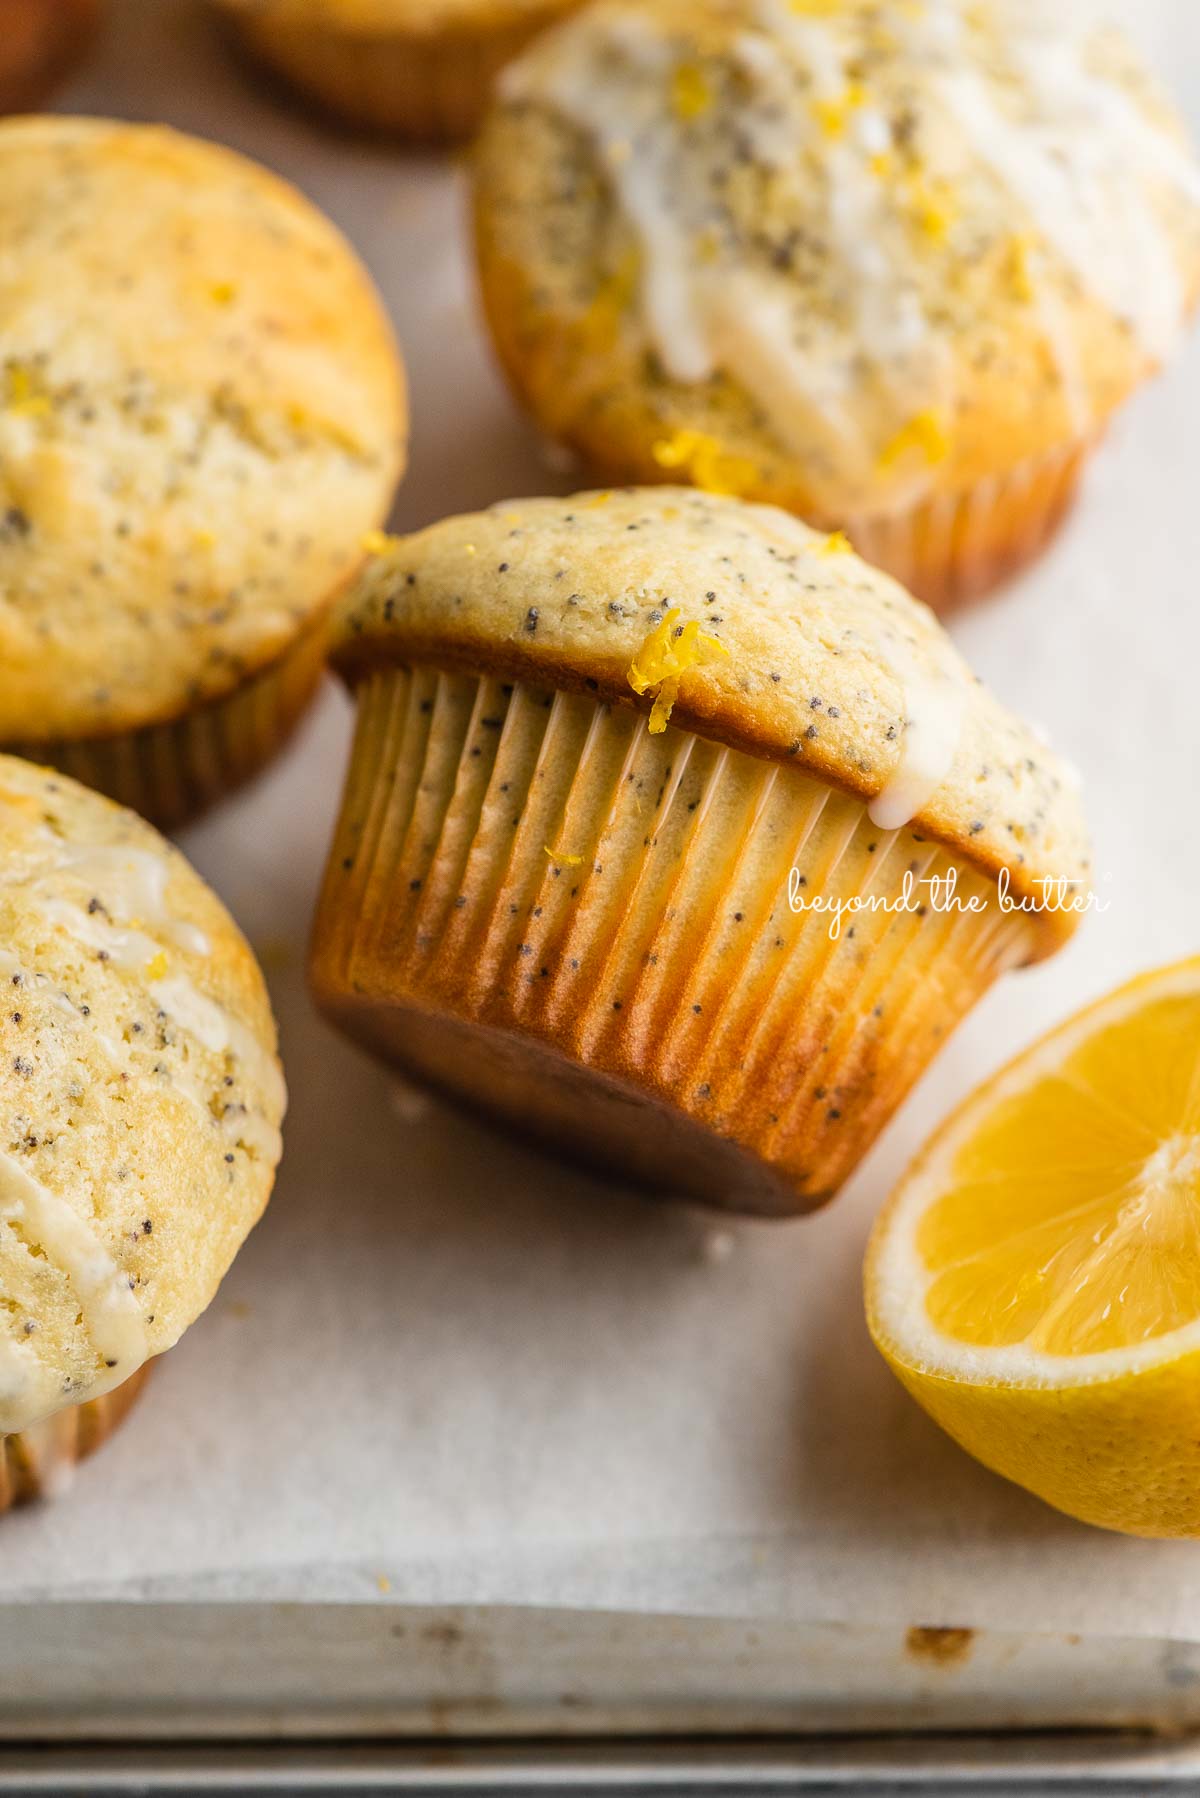 Lemon poppyseed muffins randomly placed on a parchment paper lined baking sheet with half of lemon.